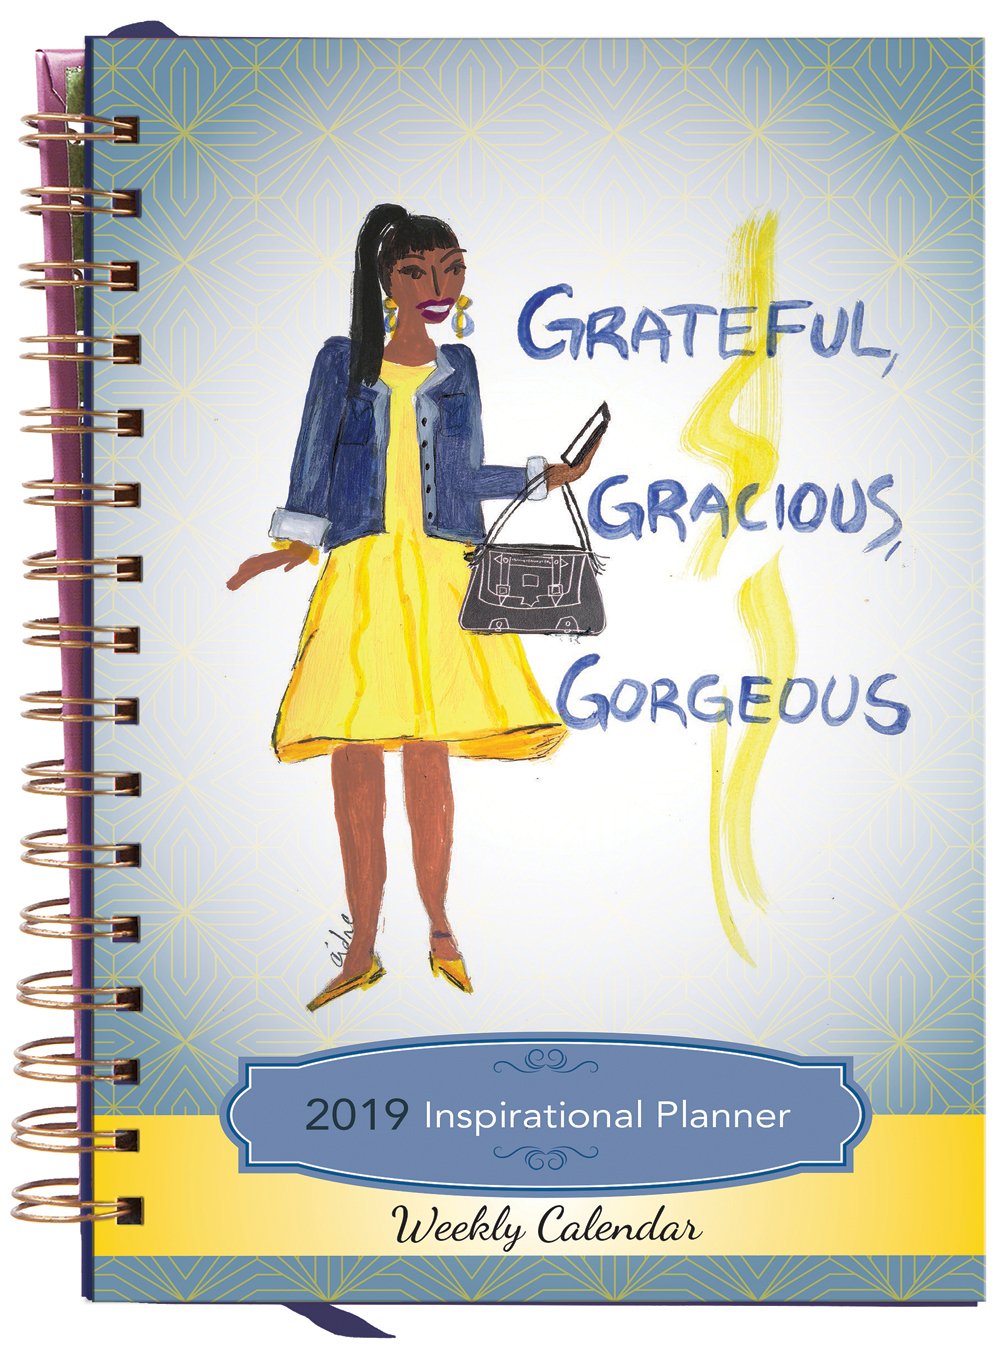 Grateful, Gracious and Gorgeous 2019 African American Inspirational Weekly Planner by Cidne Wallace